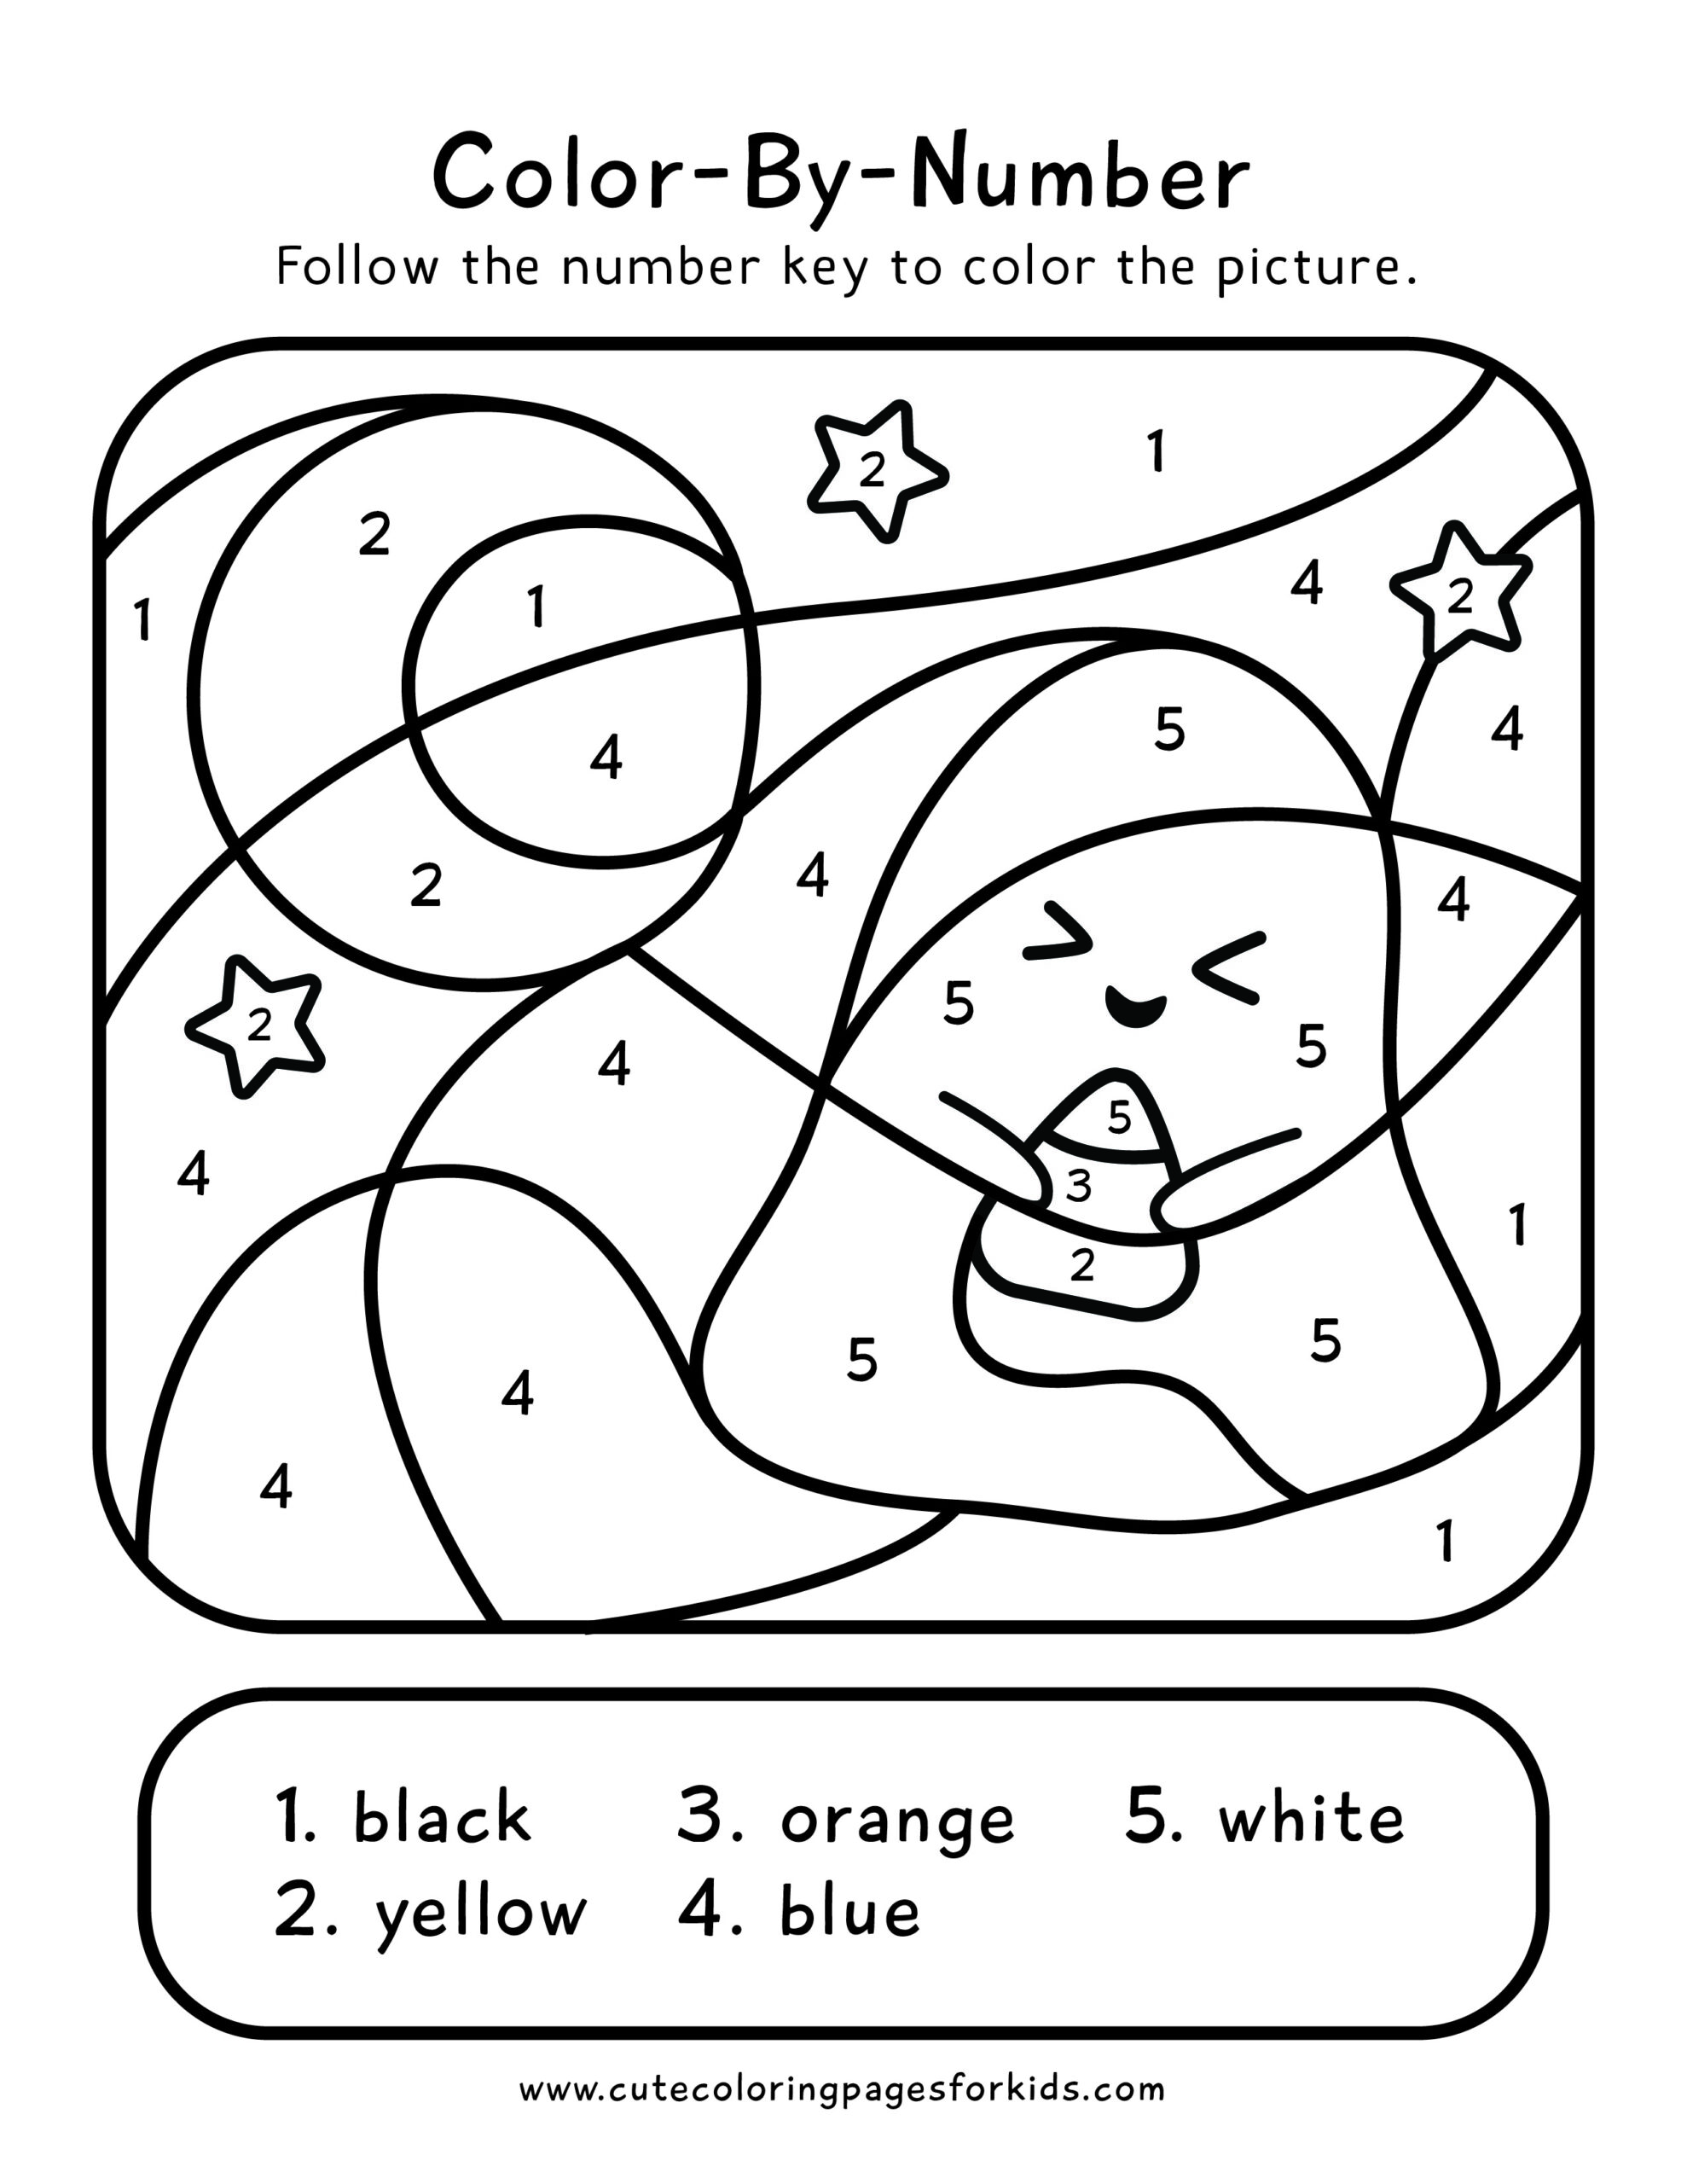 halloween-color-by-number-cute-coloring-pages-for-kids